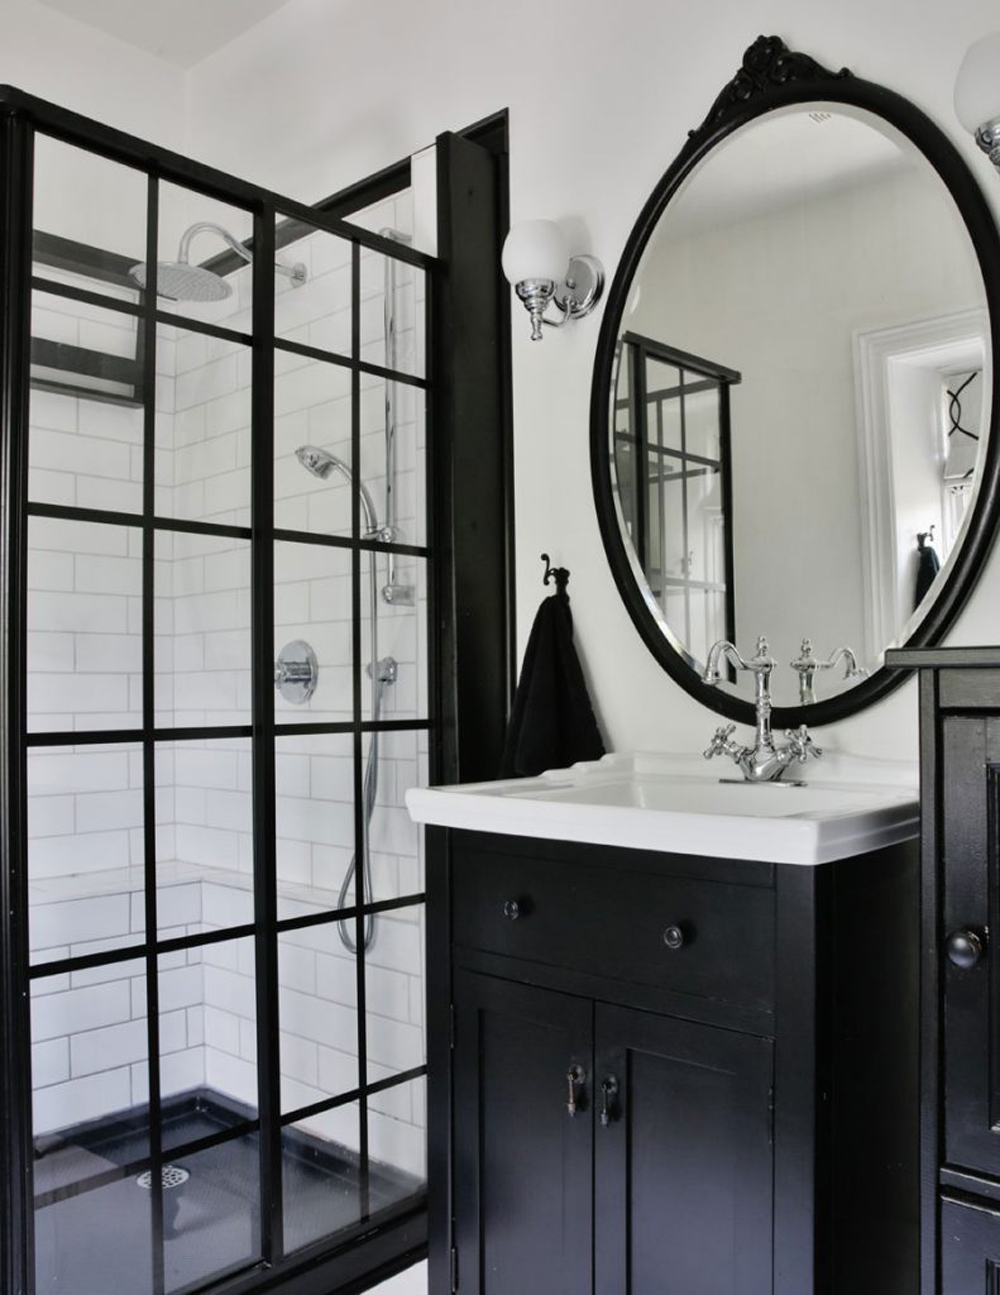 A bathroom in a black-and-white colour palette with a vinyl floor and standing matte black shower stall